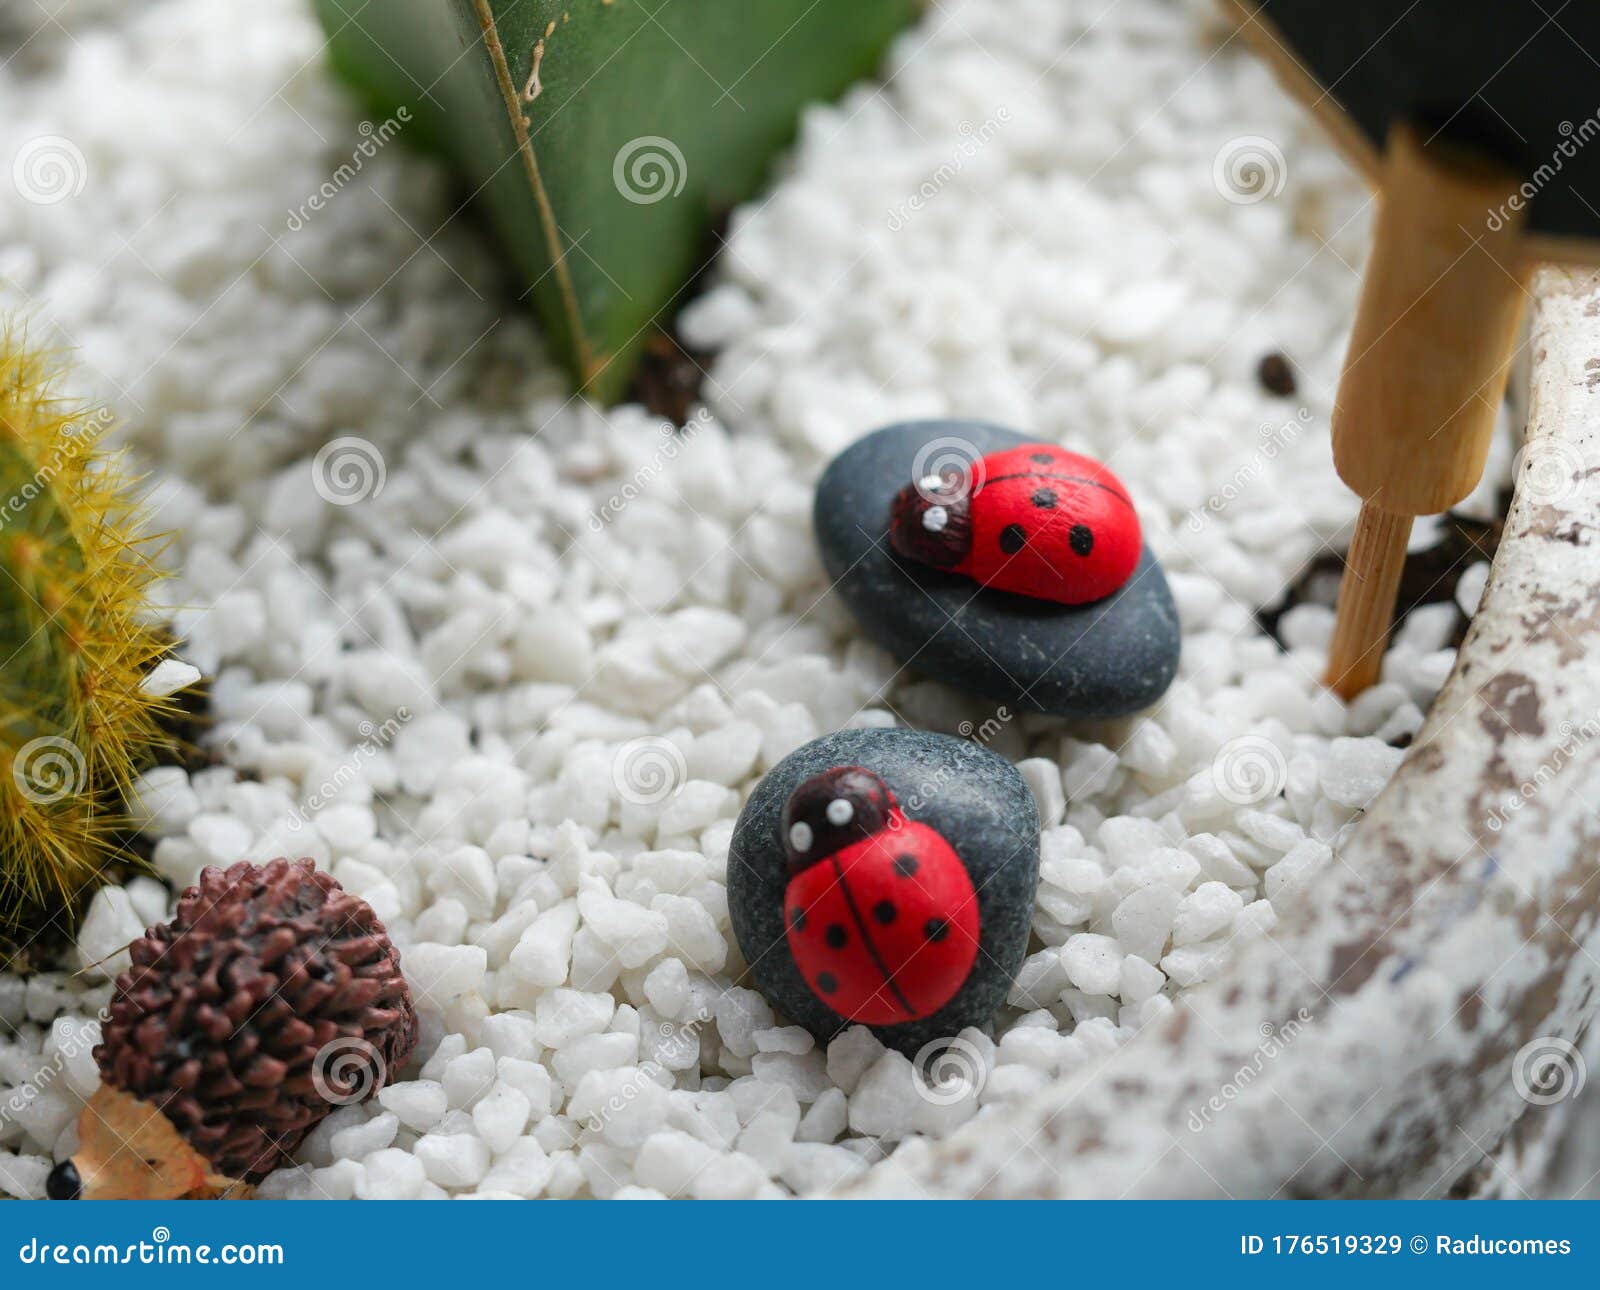 two lady bugs props positioned in a cactus vessel